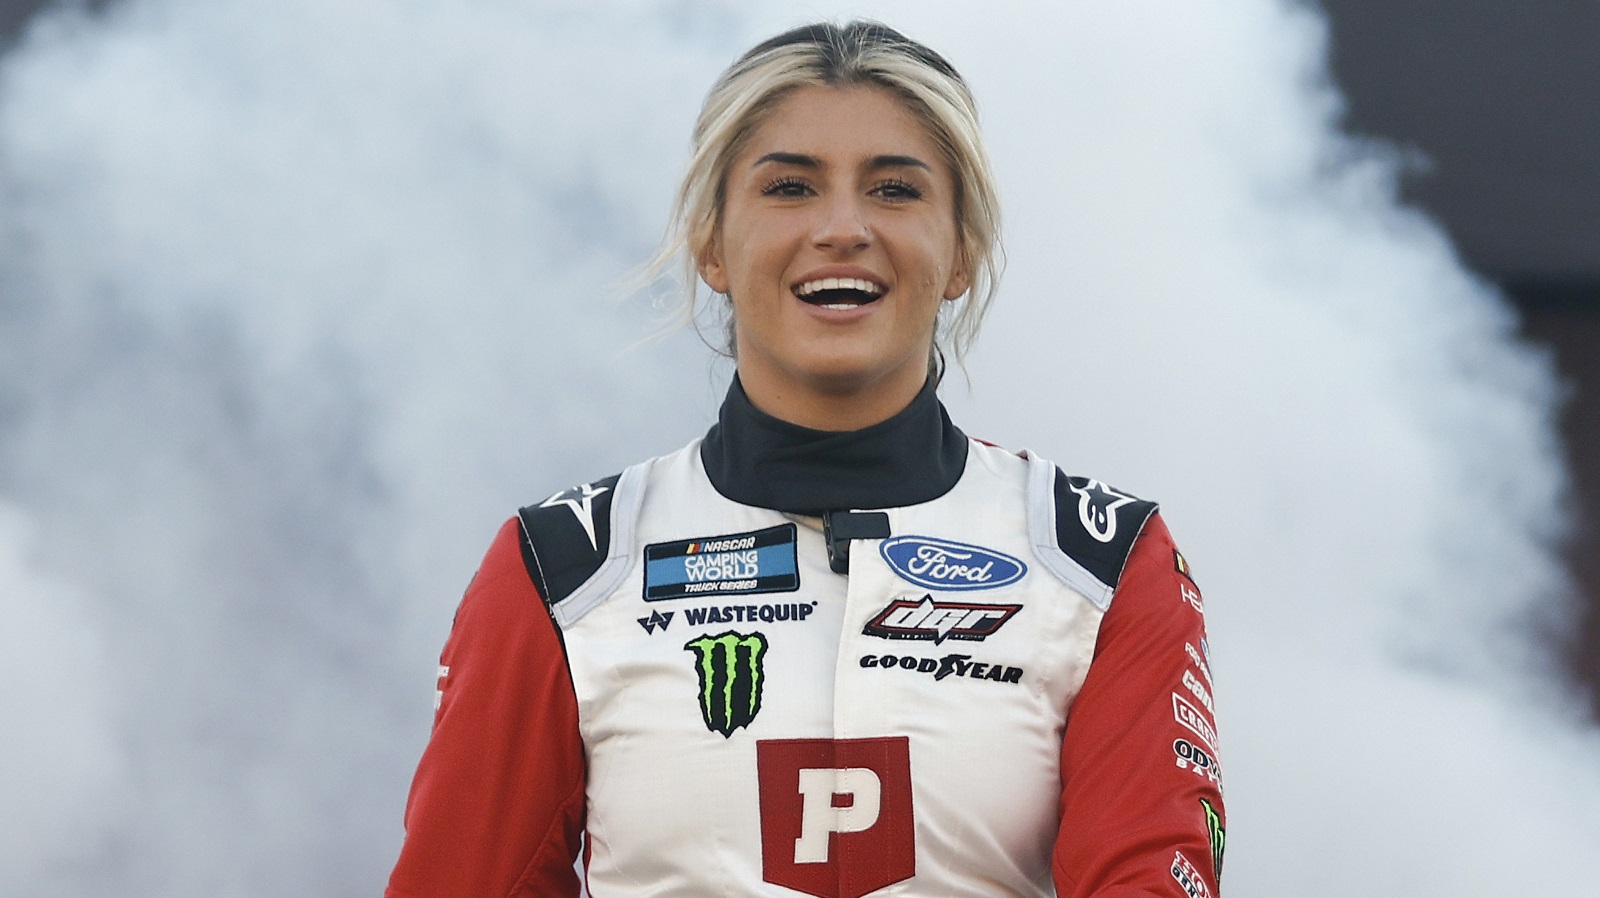 Hailie Deegan walks onstage during driver intros prior to the NASCAR Camping World Truck Series Worldwide Express 250 for Carrier Appreciation at Richmond Raceway on Aug. 13, 2022.